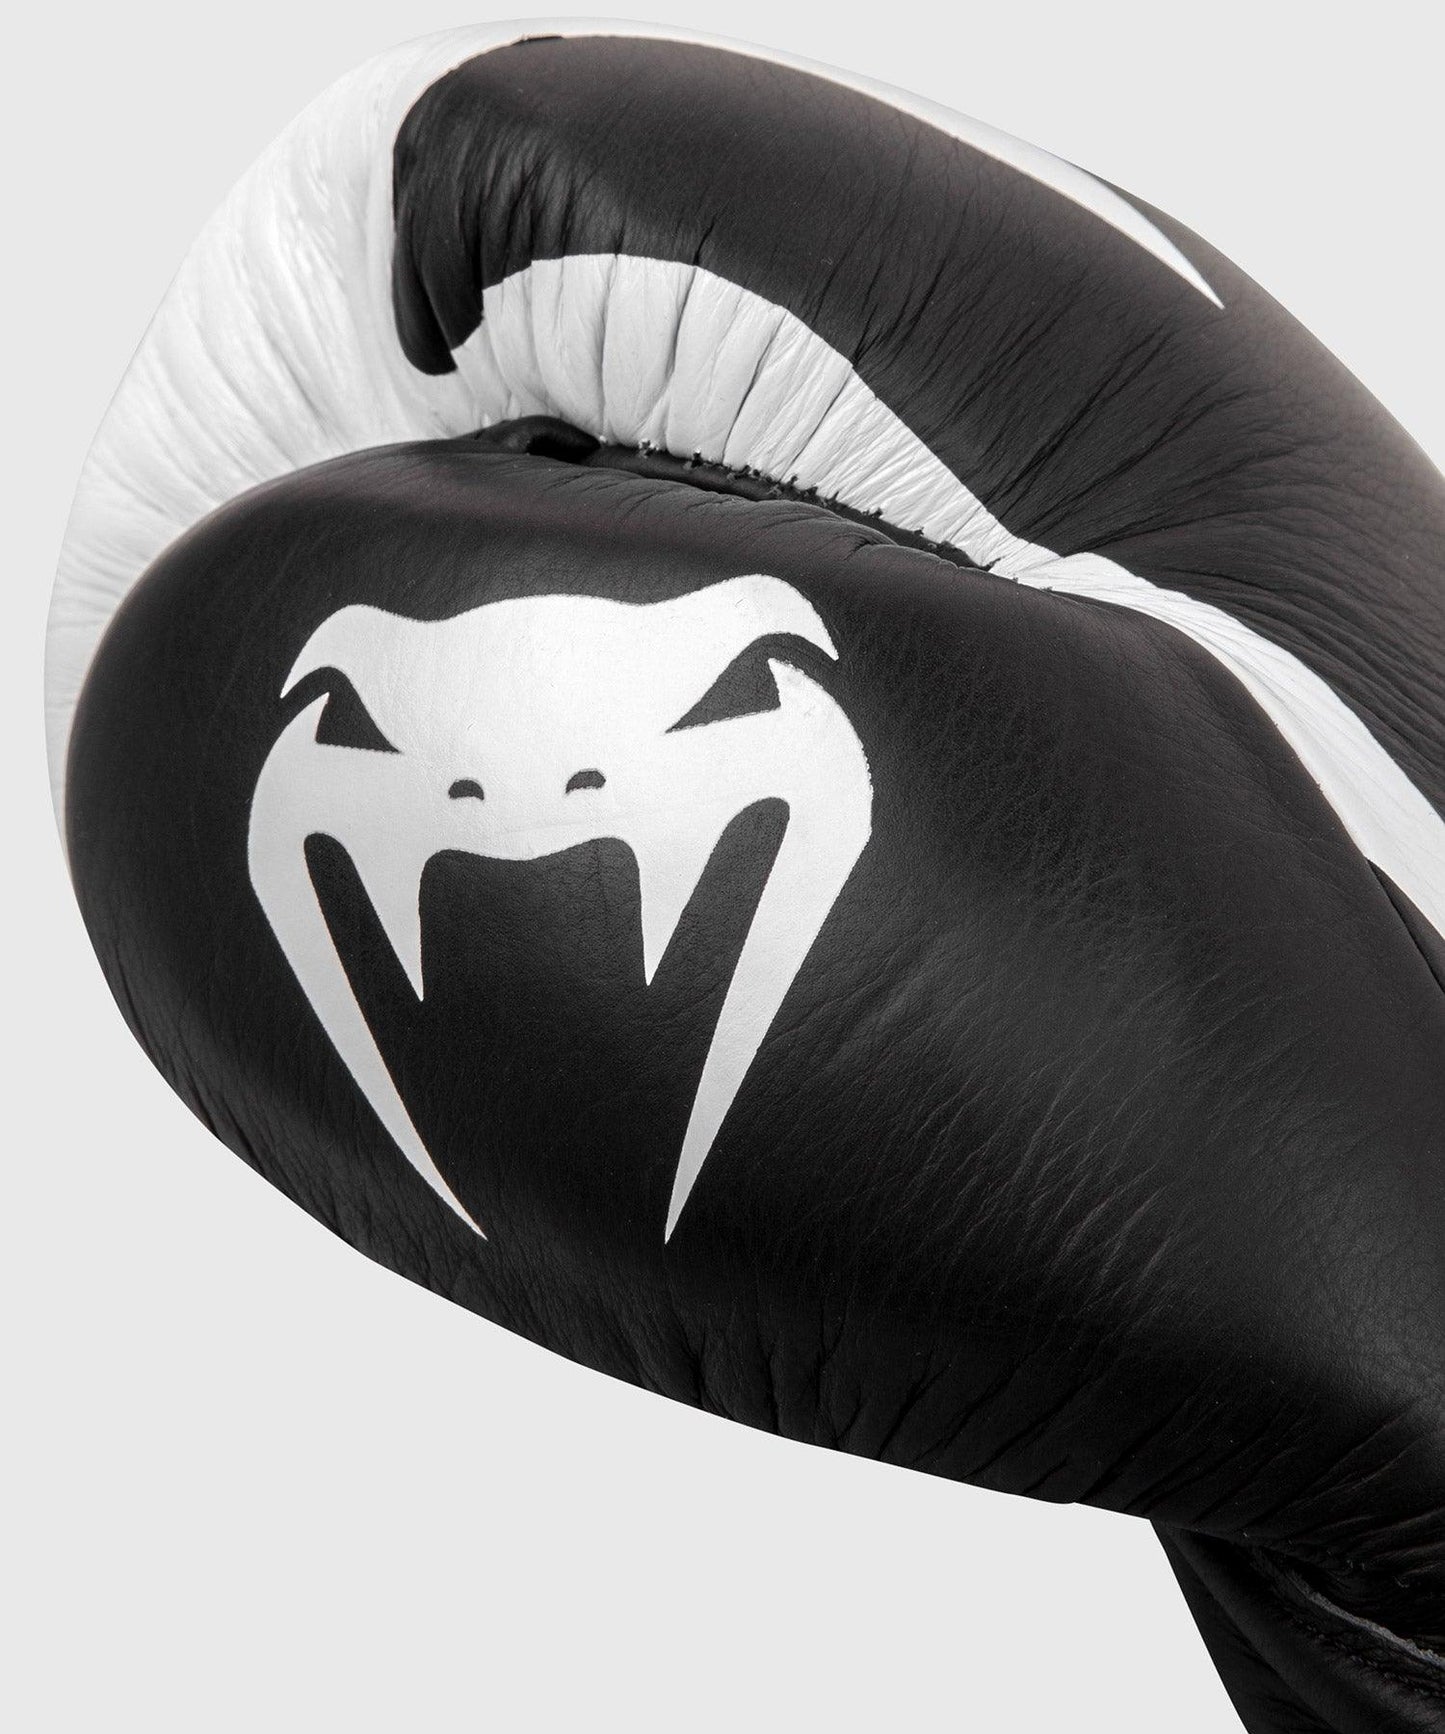 Venum Hammer Pro Boxing Gloves - With Laces - Black/White Picture 6